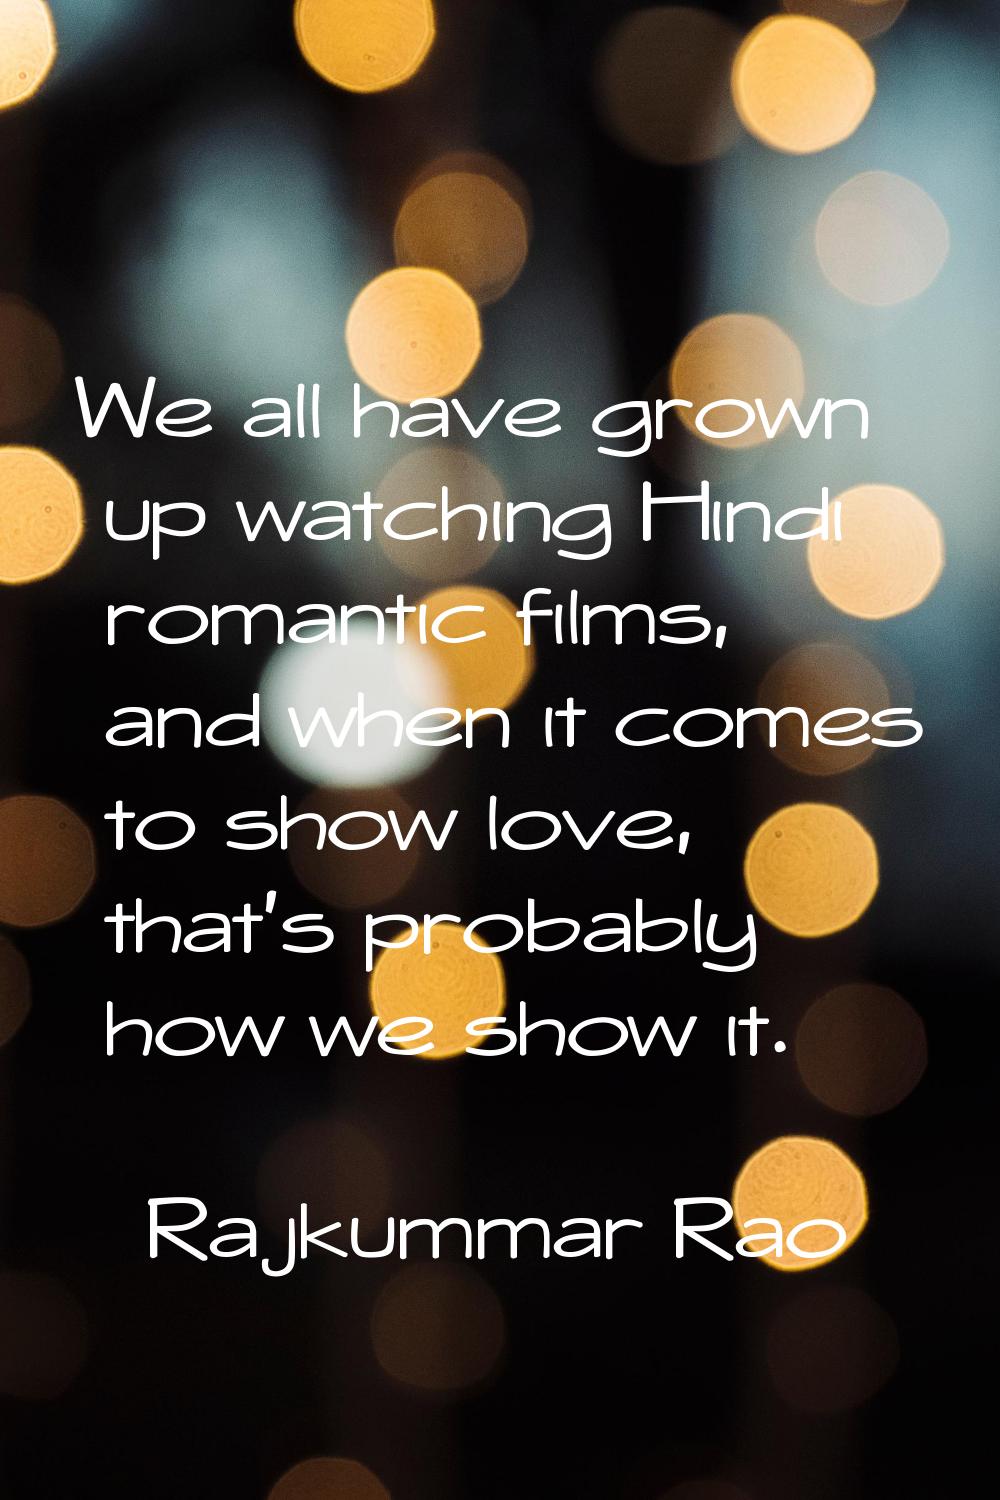 We all have grown up watching Hindi romantic films, and when it comes to show love, that's probably